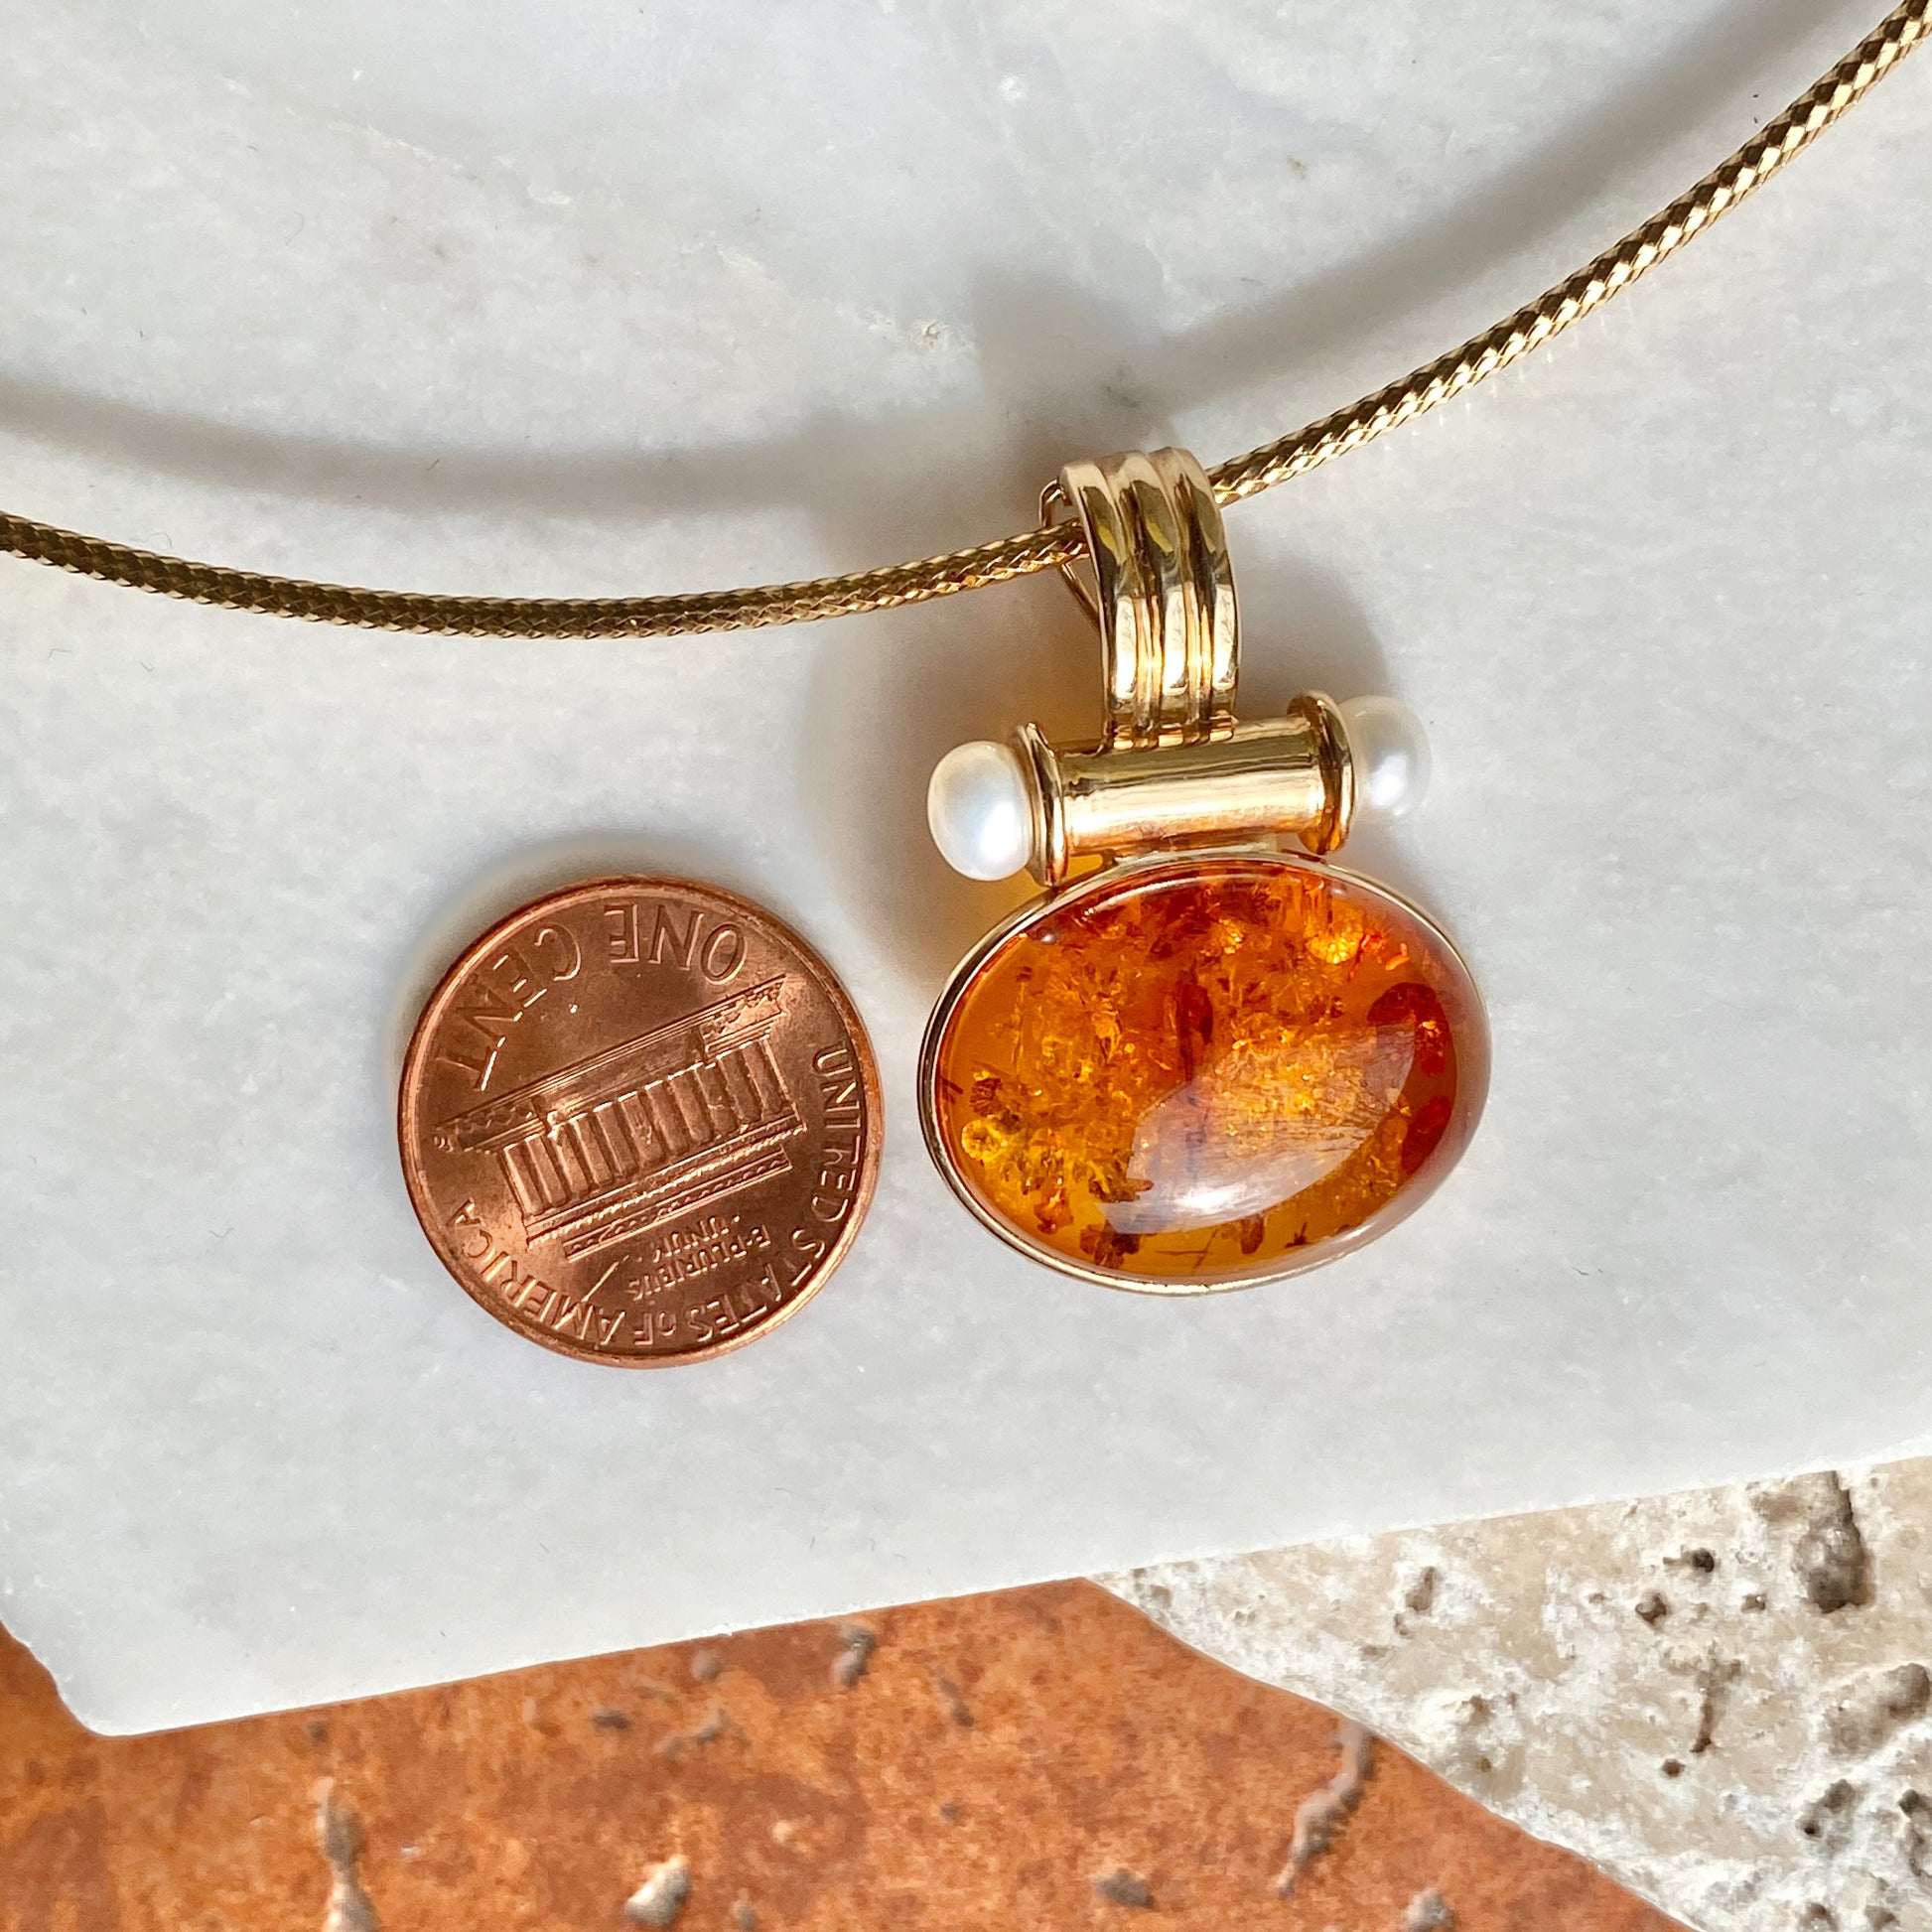 Estate 14KT Yellow Gold Oval Amber + Pearl Pendant Enhancer Omega Clip, Estate 14KT Yellow Gold Oval Amber + Pearl Pendant Enhancer Omega Clip - Legacy Saint Jewelry